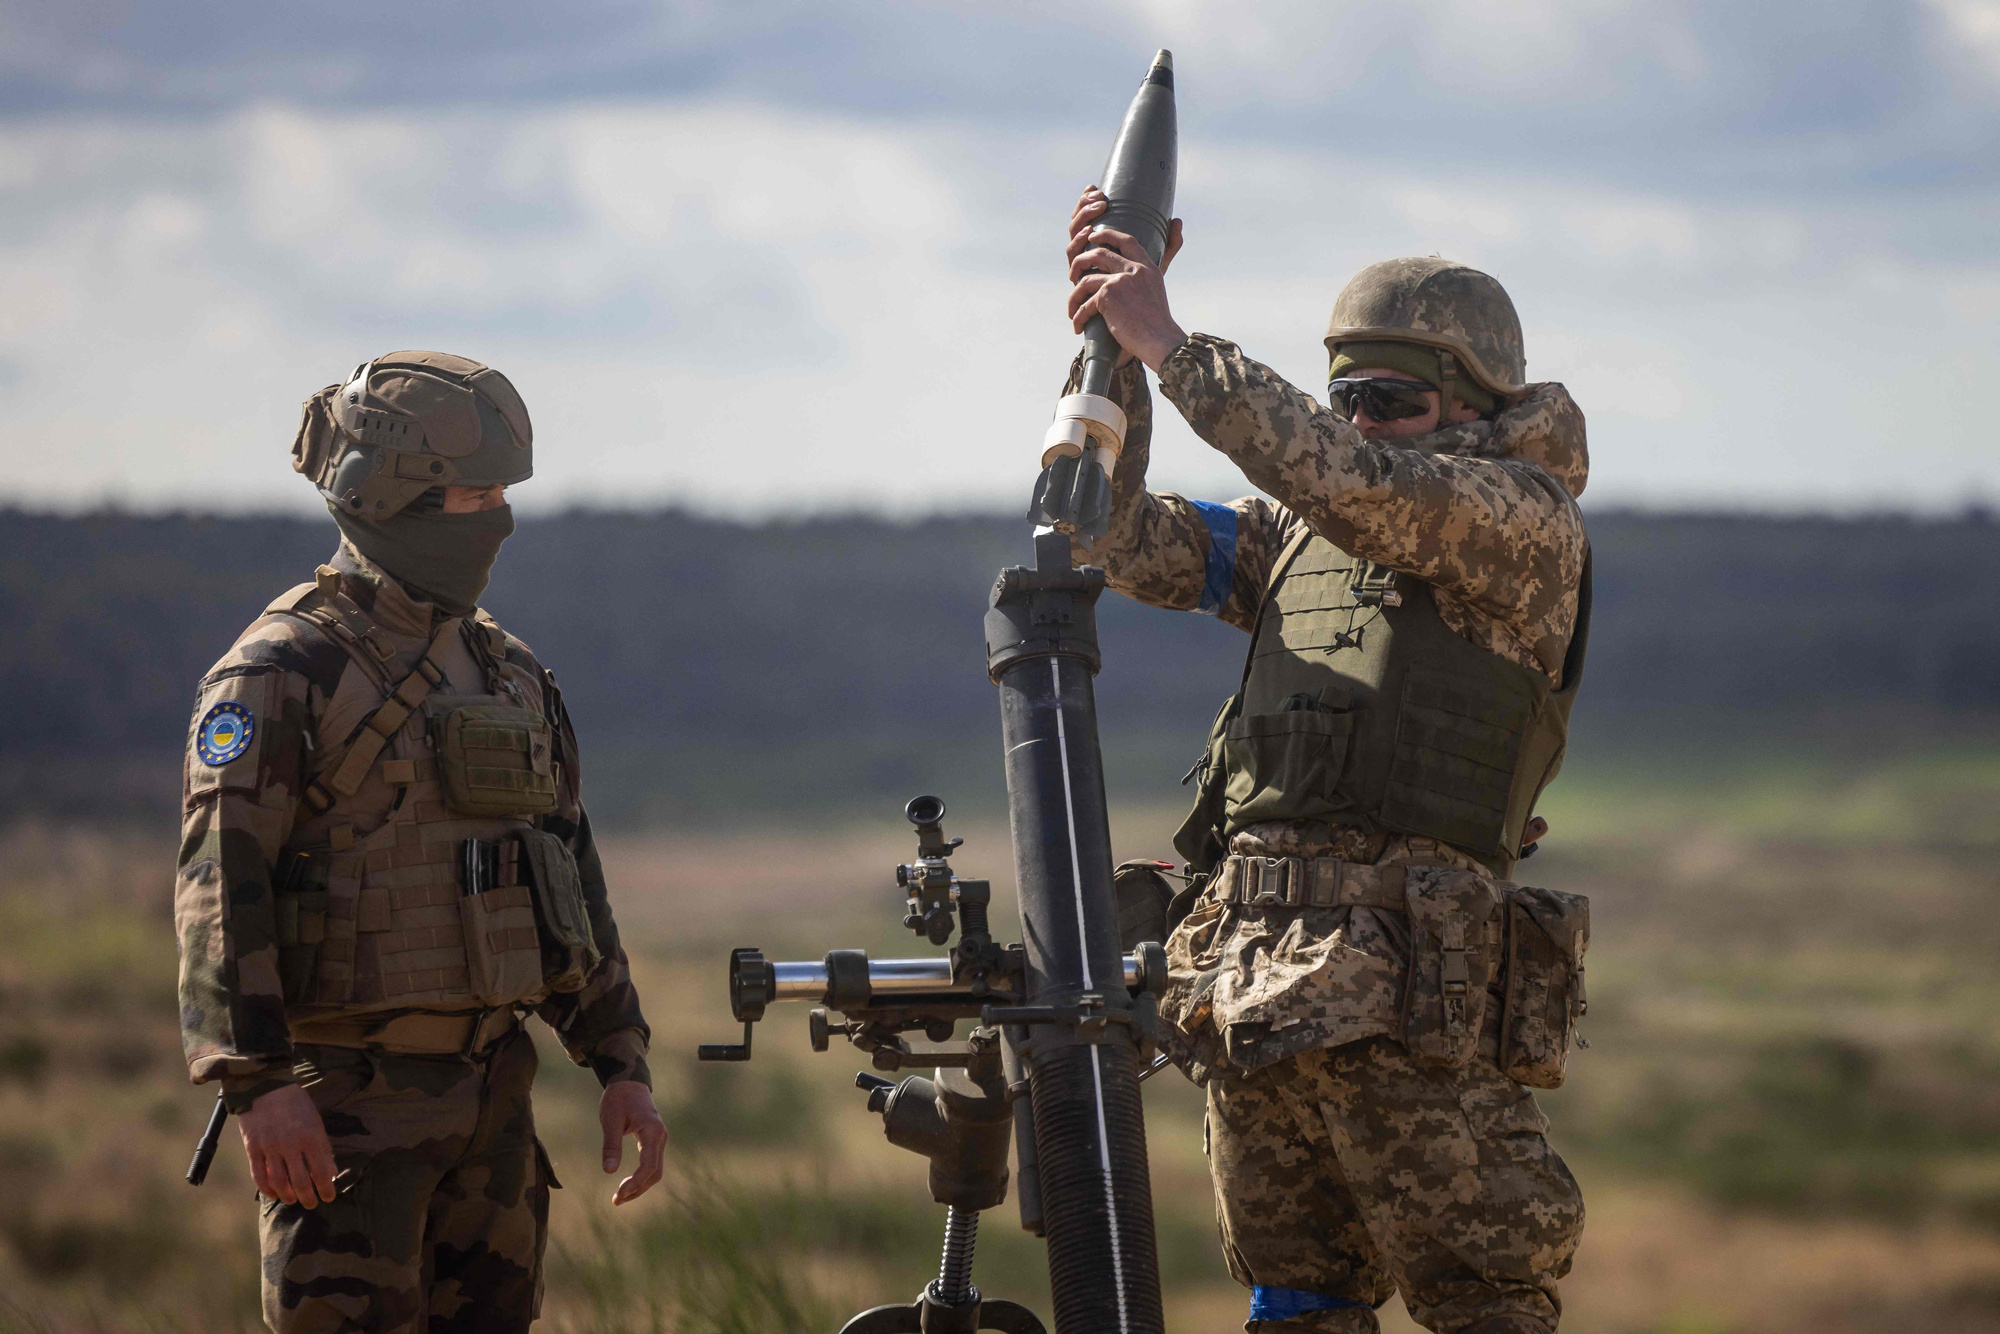 A Ukrainian soldier loads a mortar shell under the supervision of a French army instructor (L) during a military training with French servicemen, in a military training compound at an undisclosed location in Poland